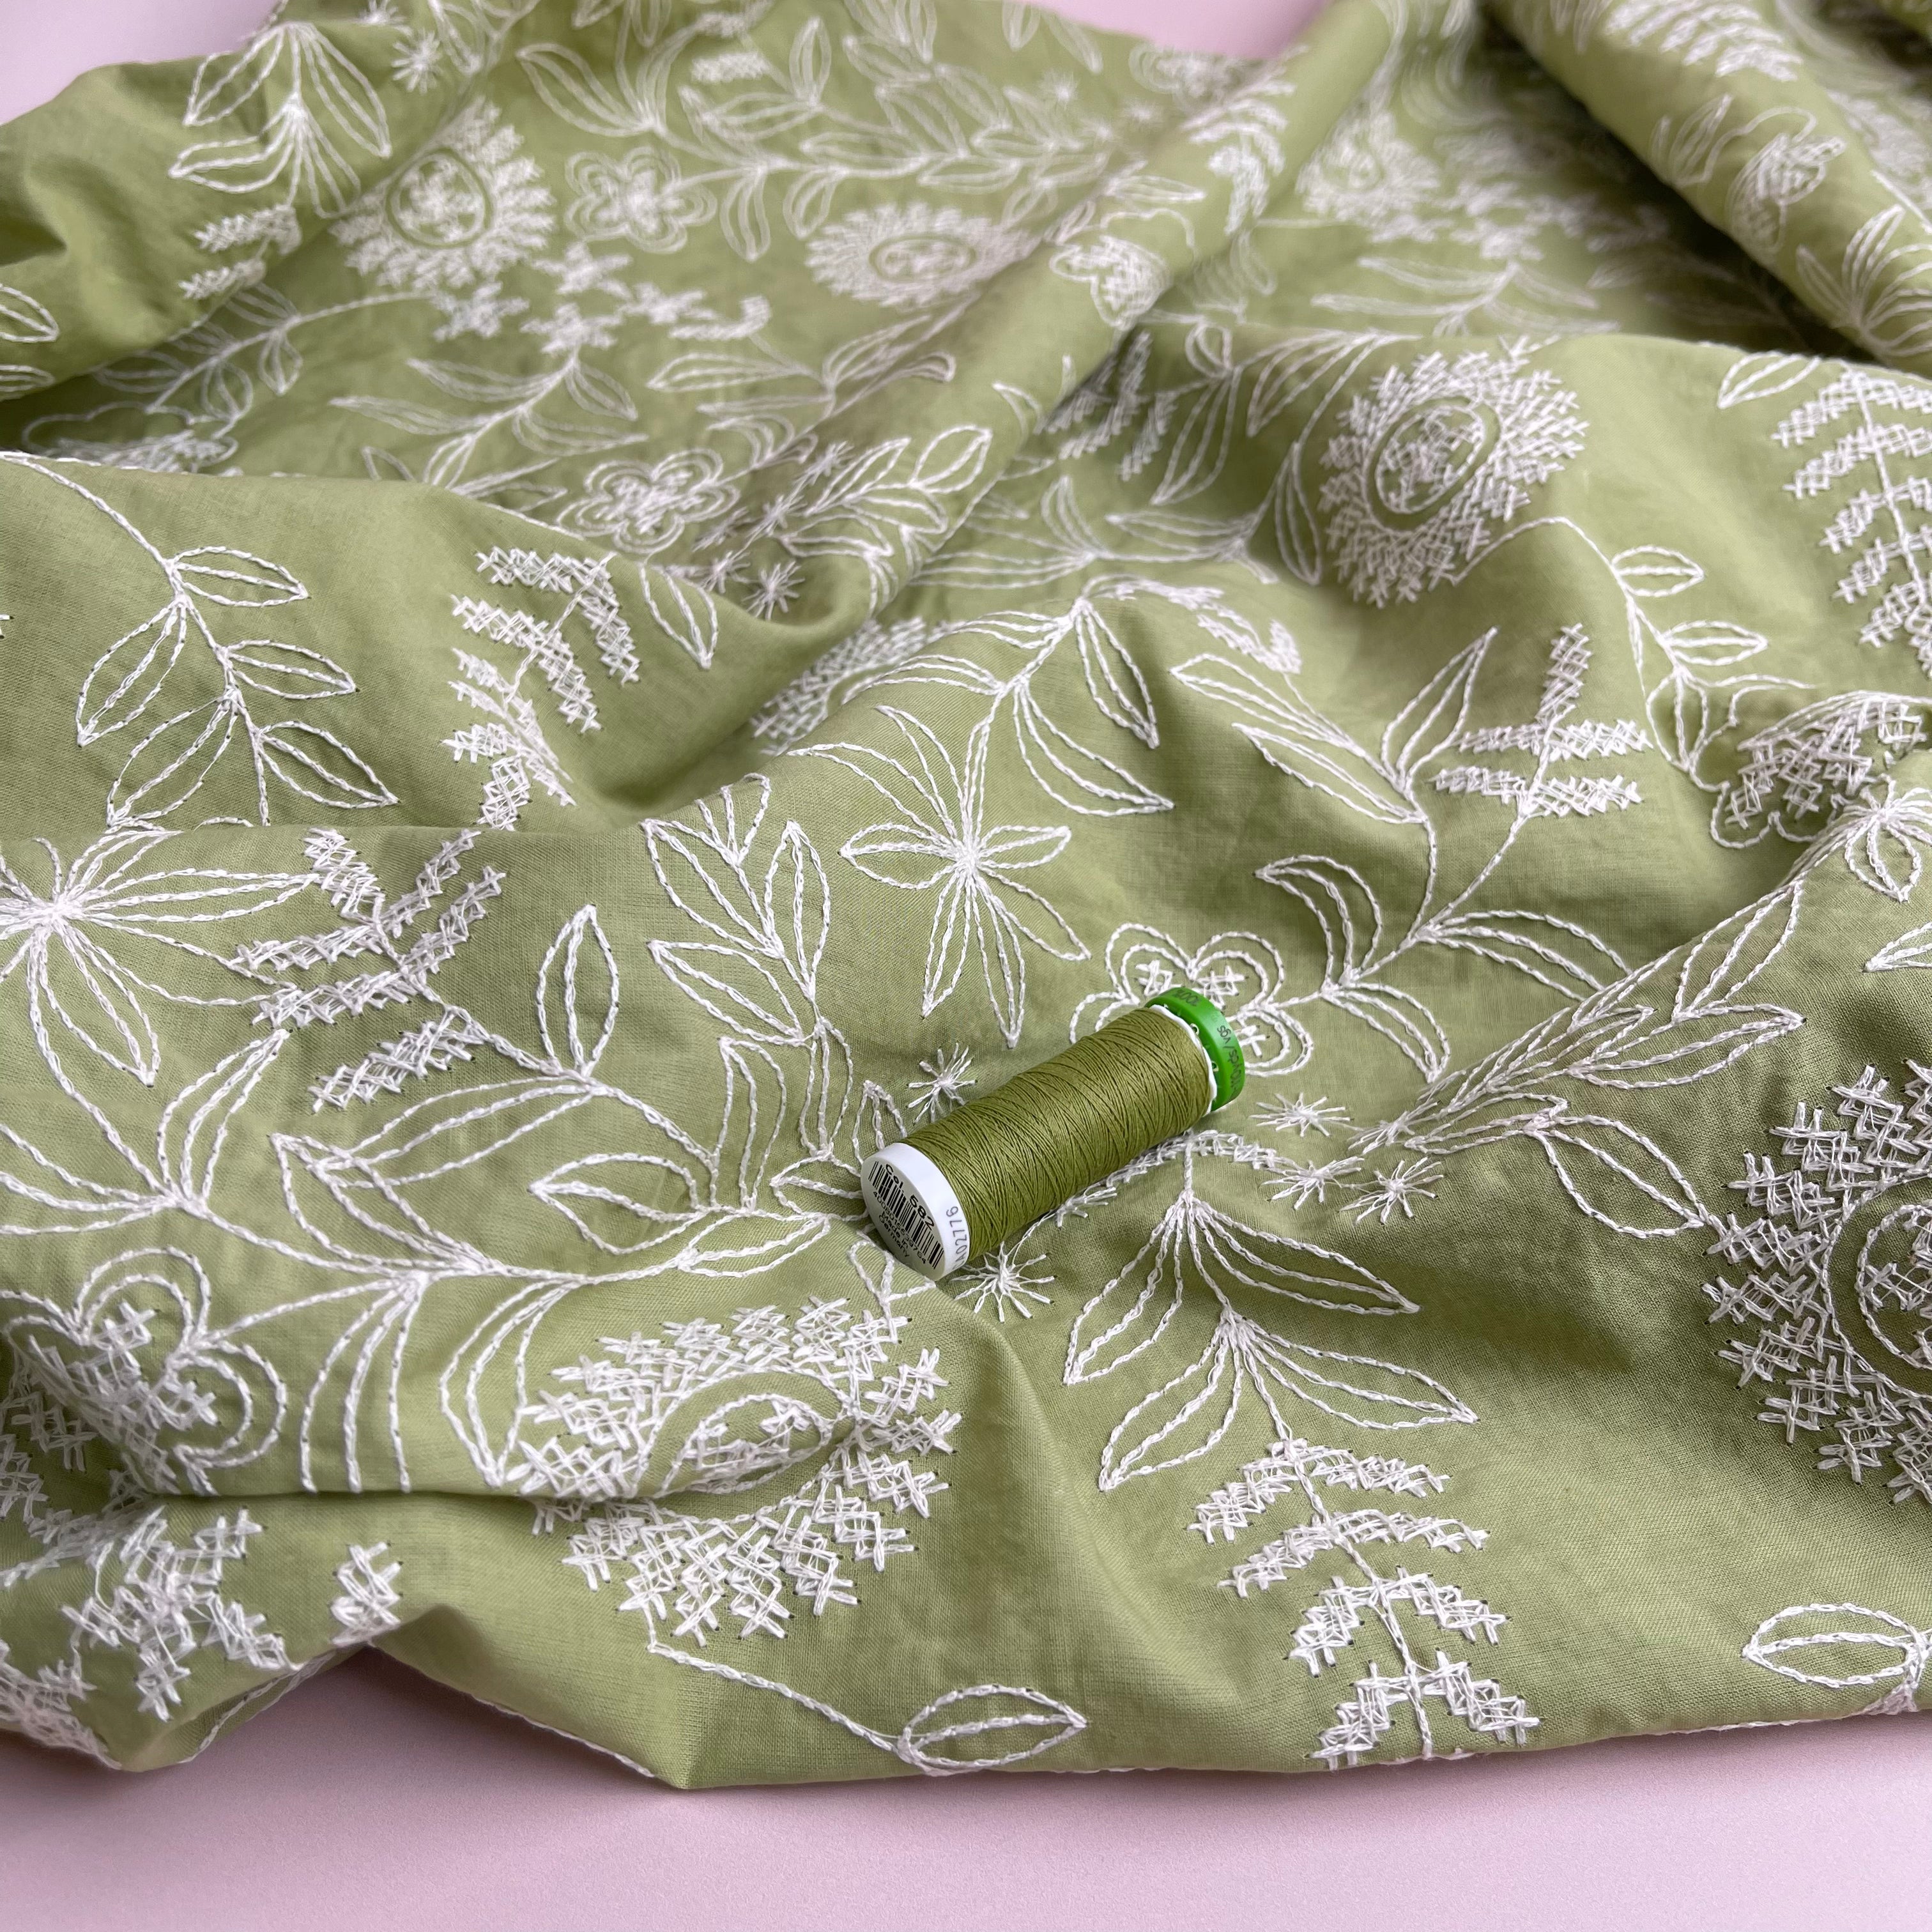 Embroidered Wildflowers on Spring Green Cotton Fabric